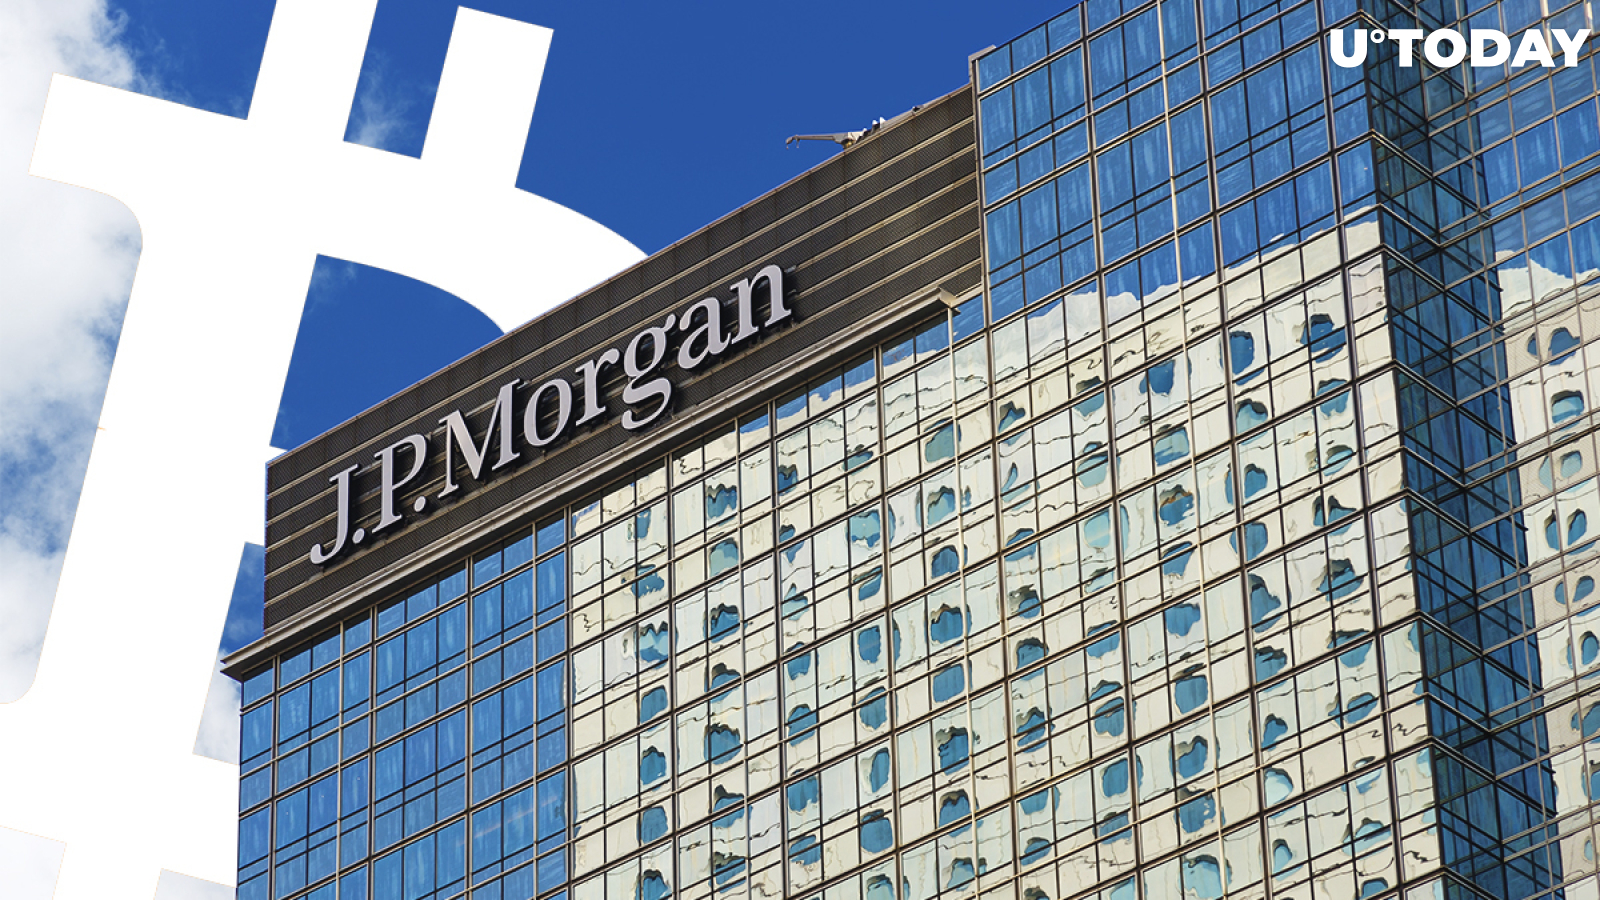 Bitcoin Price Repeats 2017 Rise-and-Fall Pattern: JP Morgan Analysts